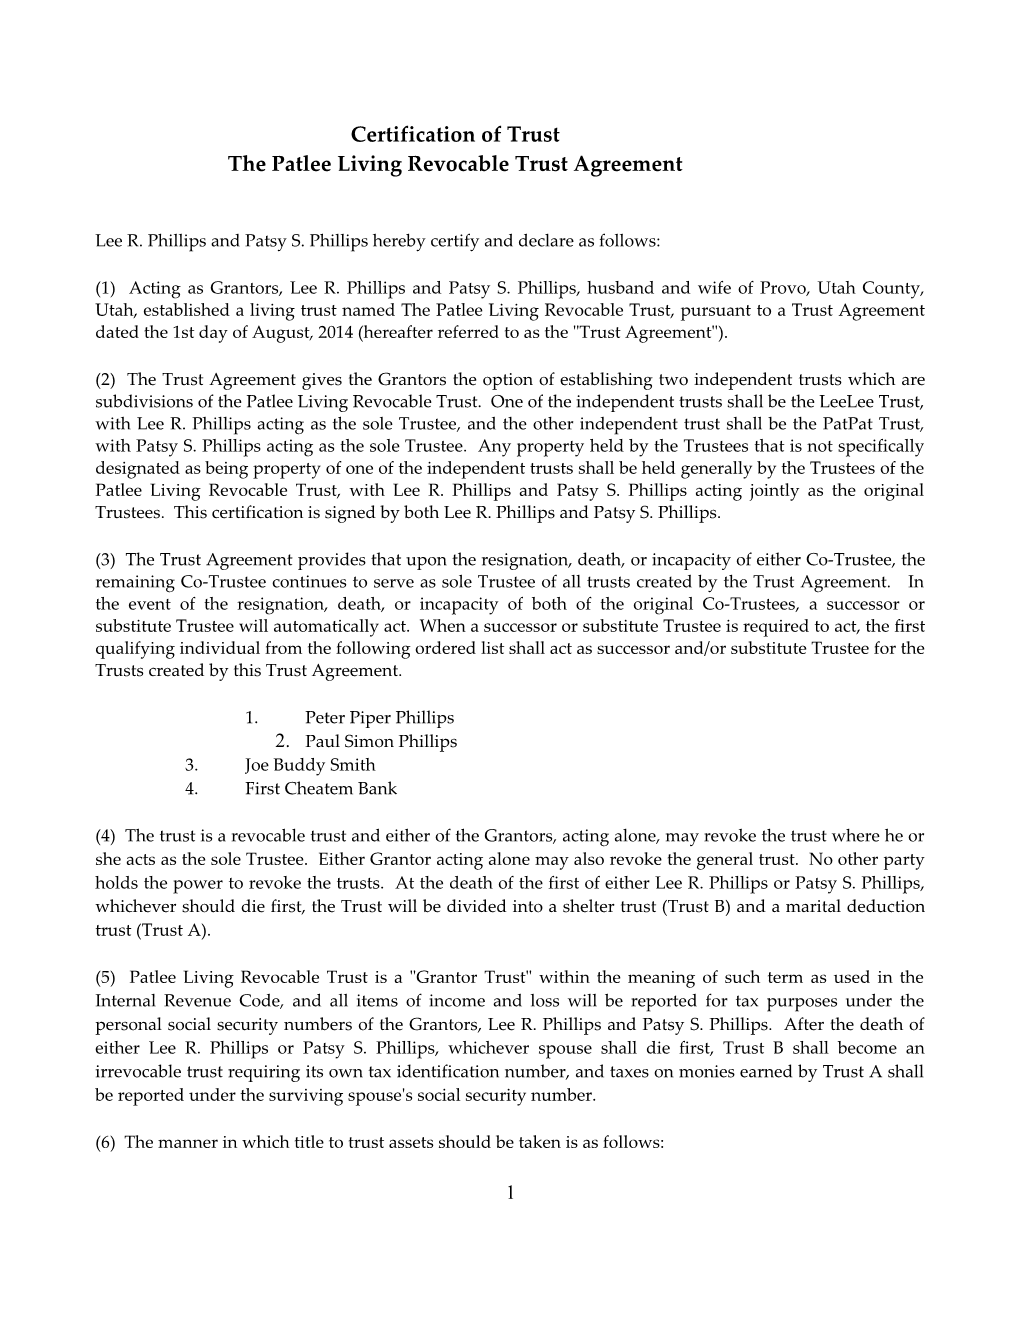 The Patlee Living Revocable Trust Agreement